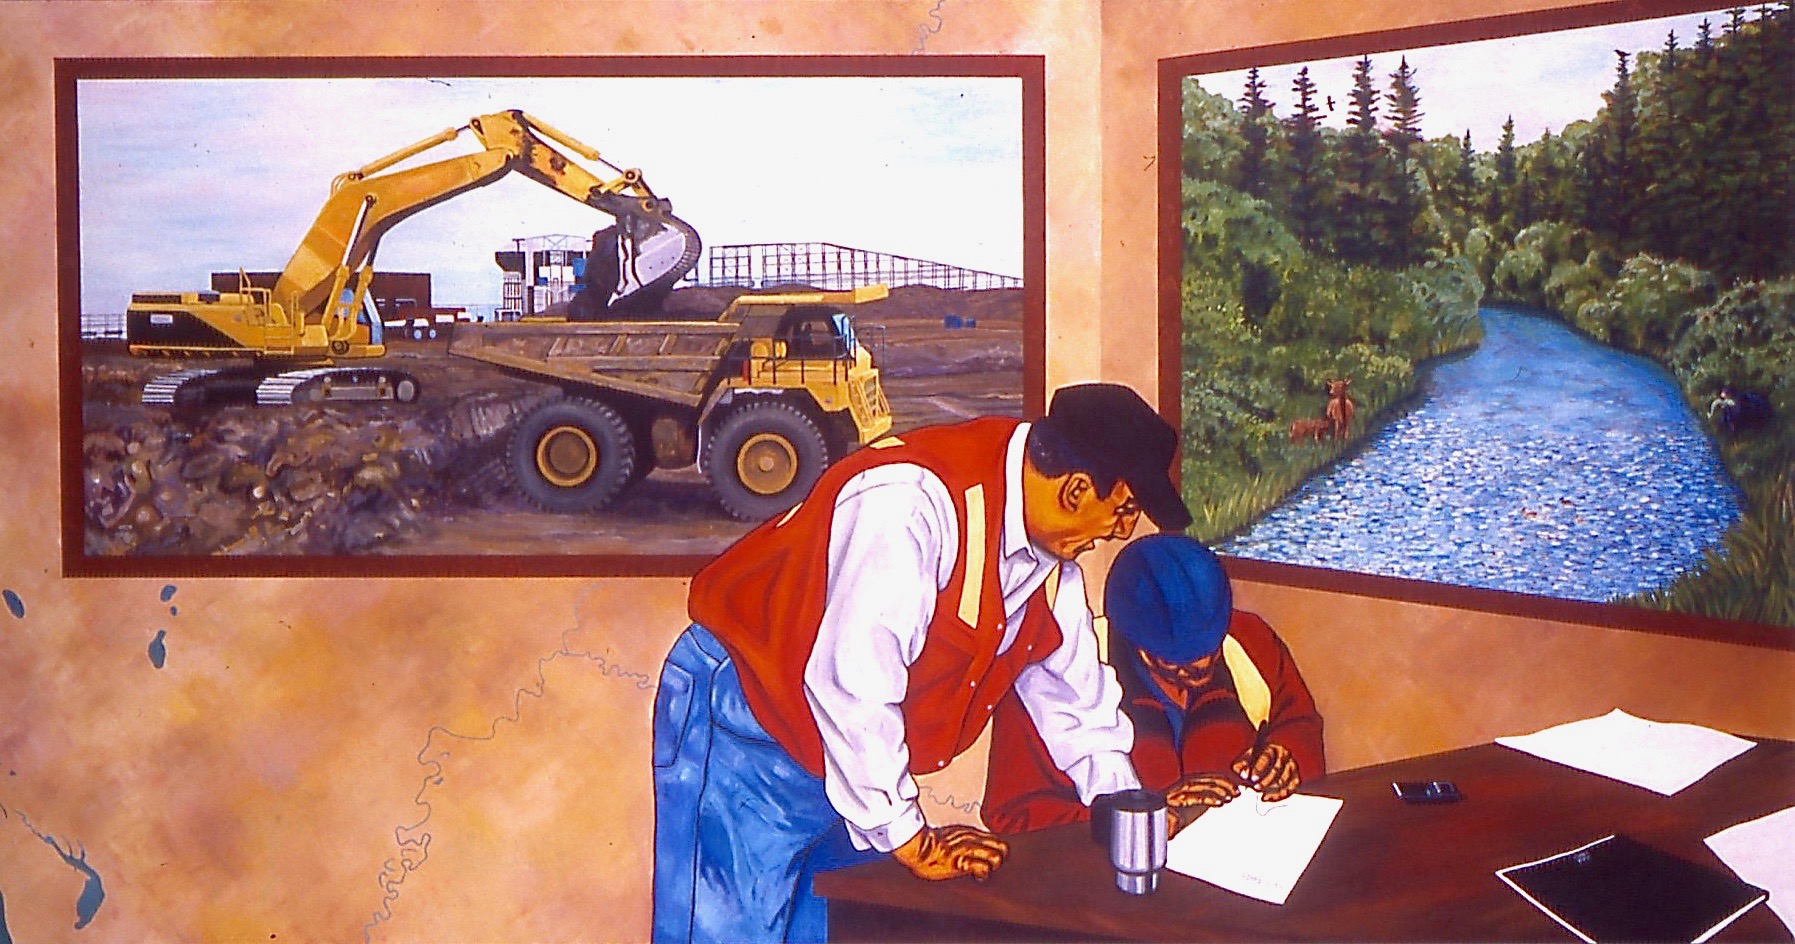 a painting of modern industrial life in Fort McMurray, Alberta